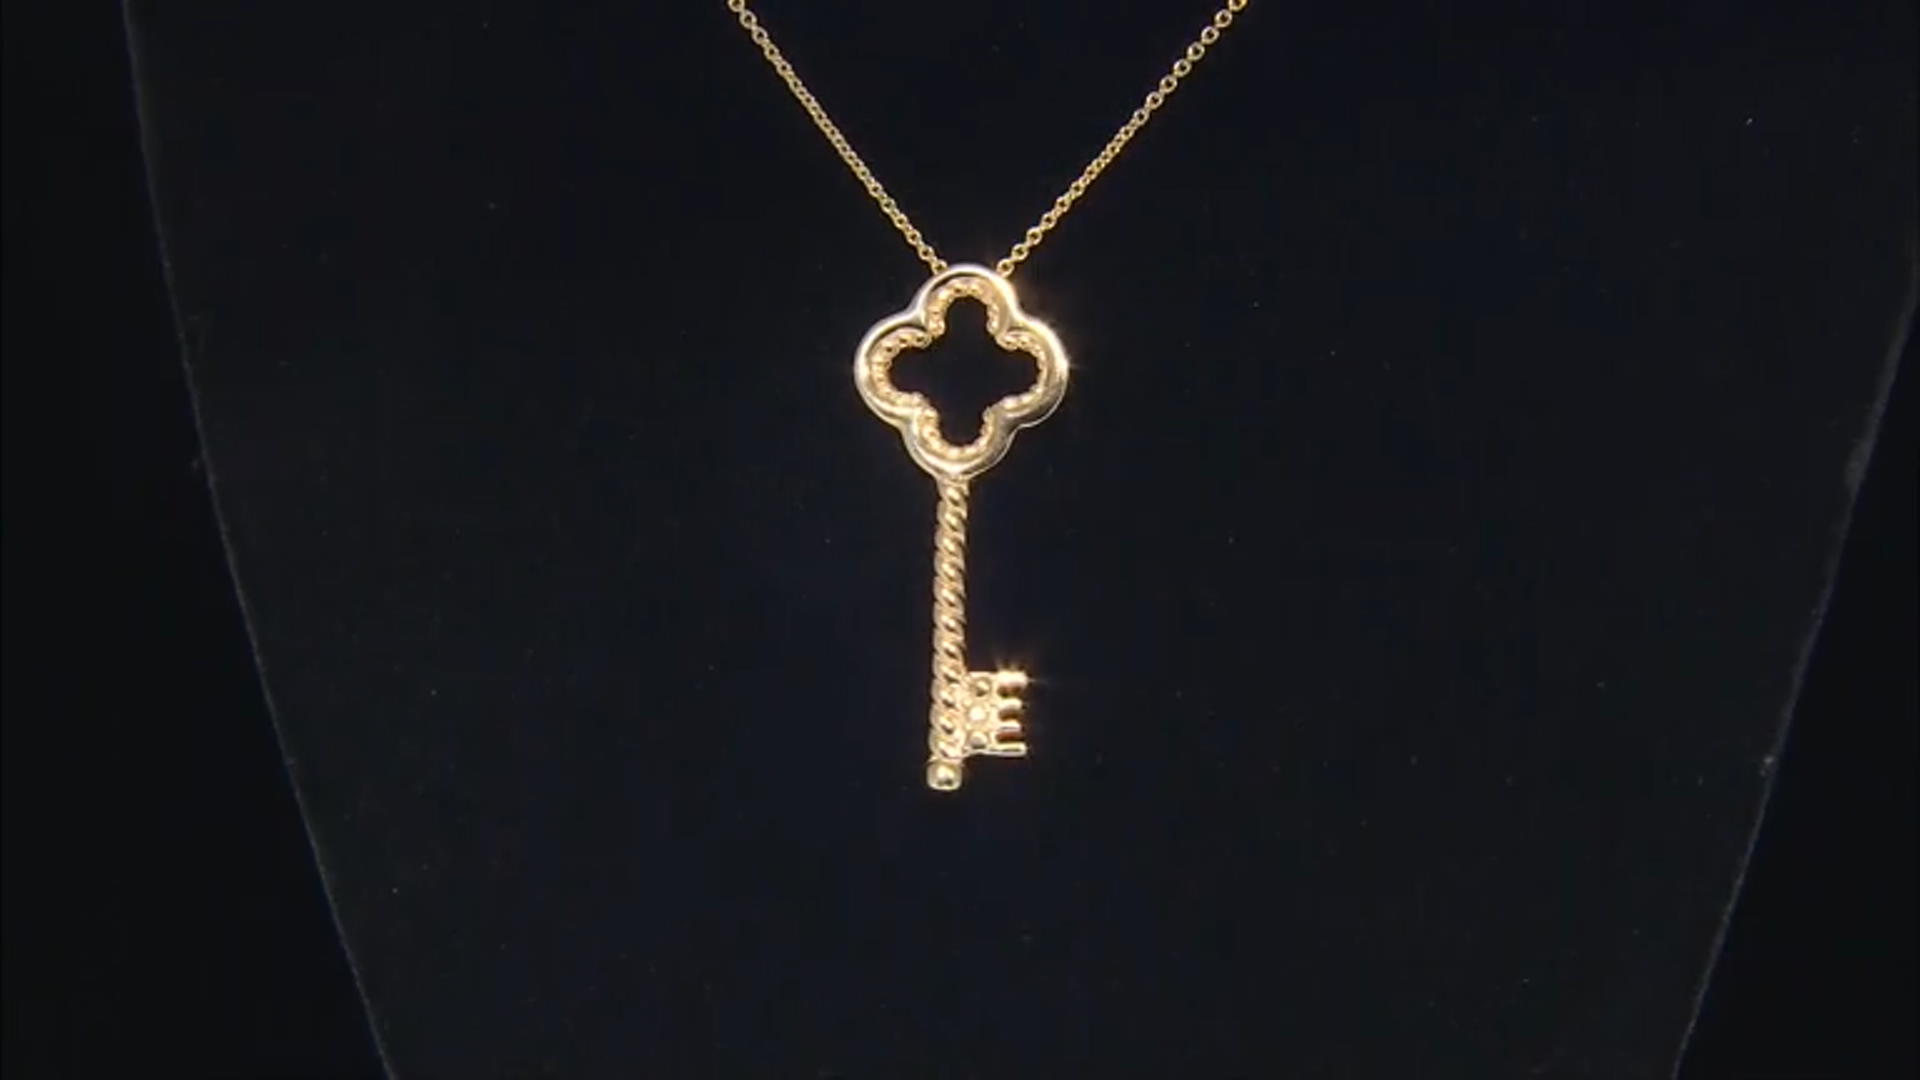 18k Yellow Gold Over Sterling Silver Sliding Key Pendant 20 Inch Cable Link Necklace Video Thumbnail